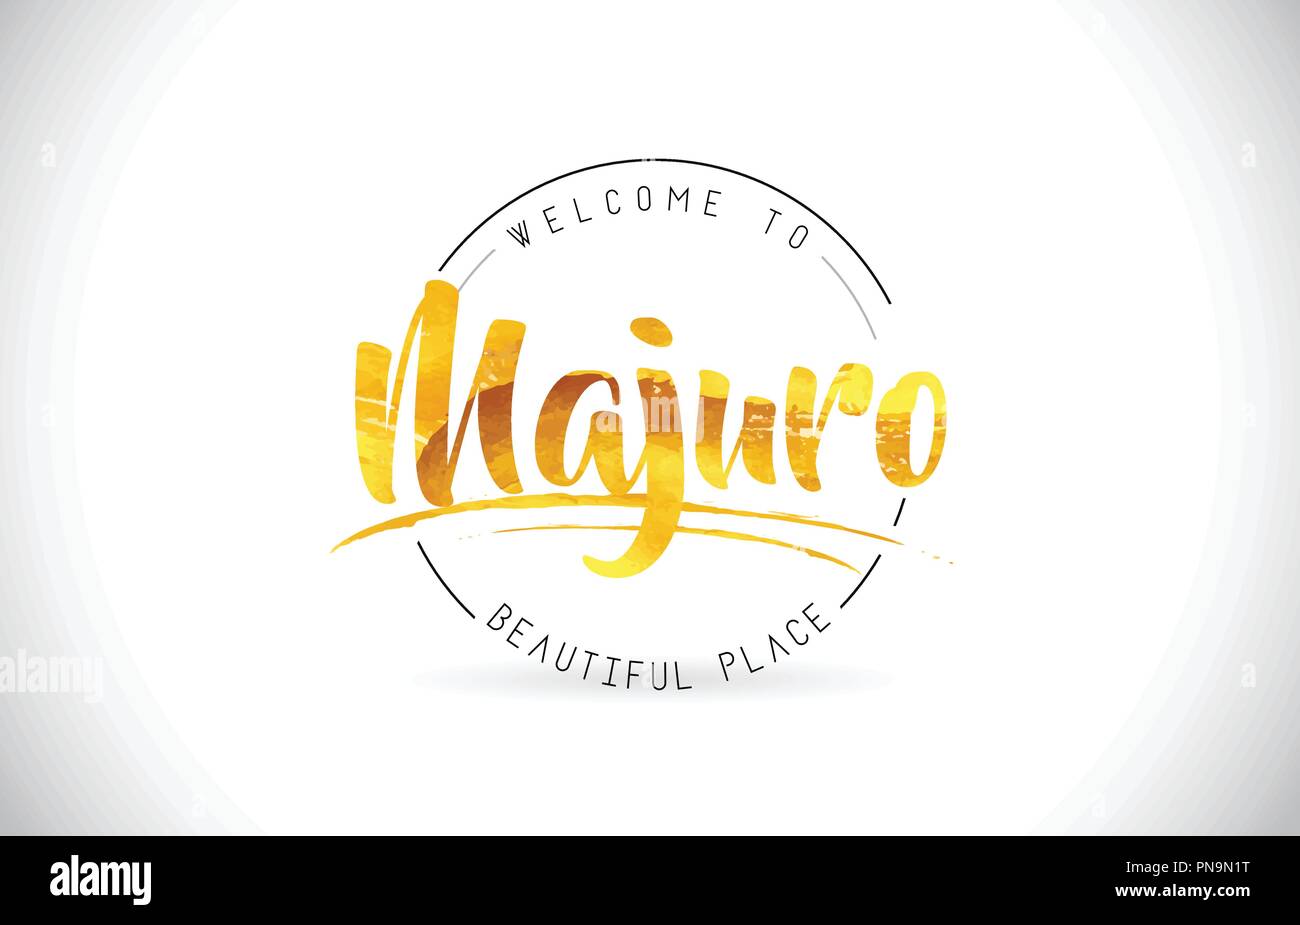 Majuro Welcome To Word Text with Handwritten Font and Golden Texture Design Illustration Vector. Stock Vector